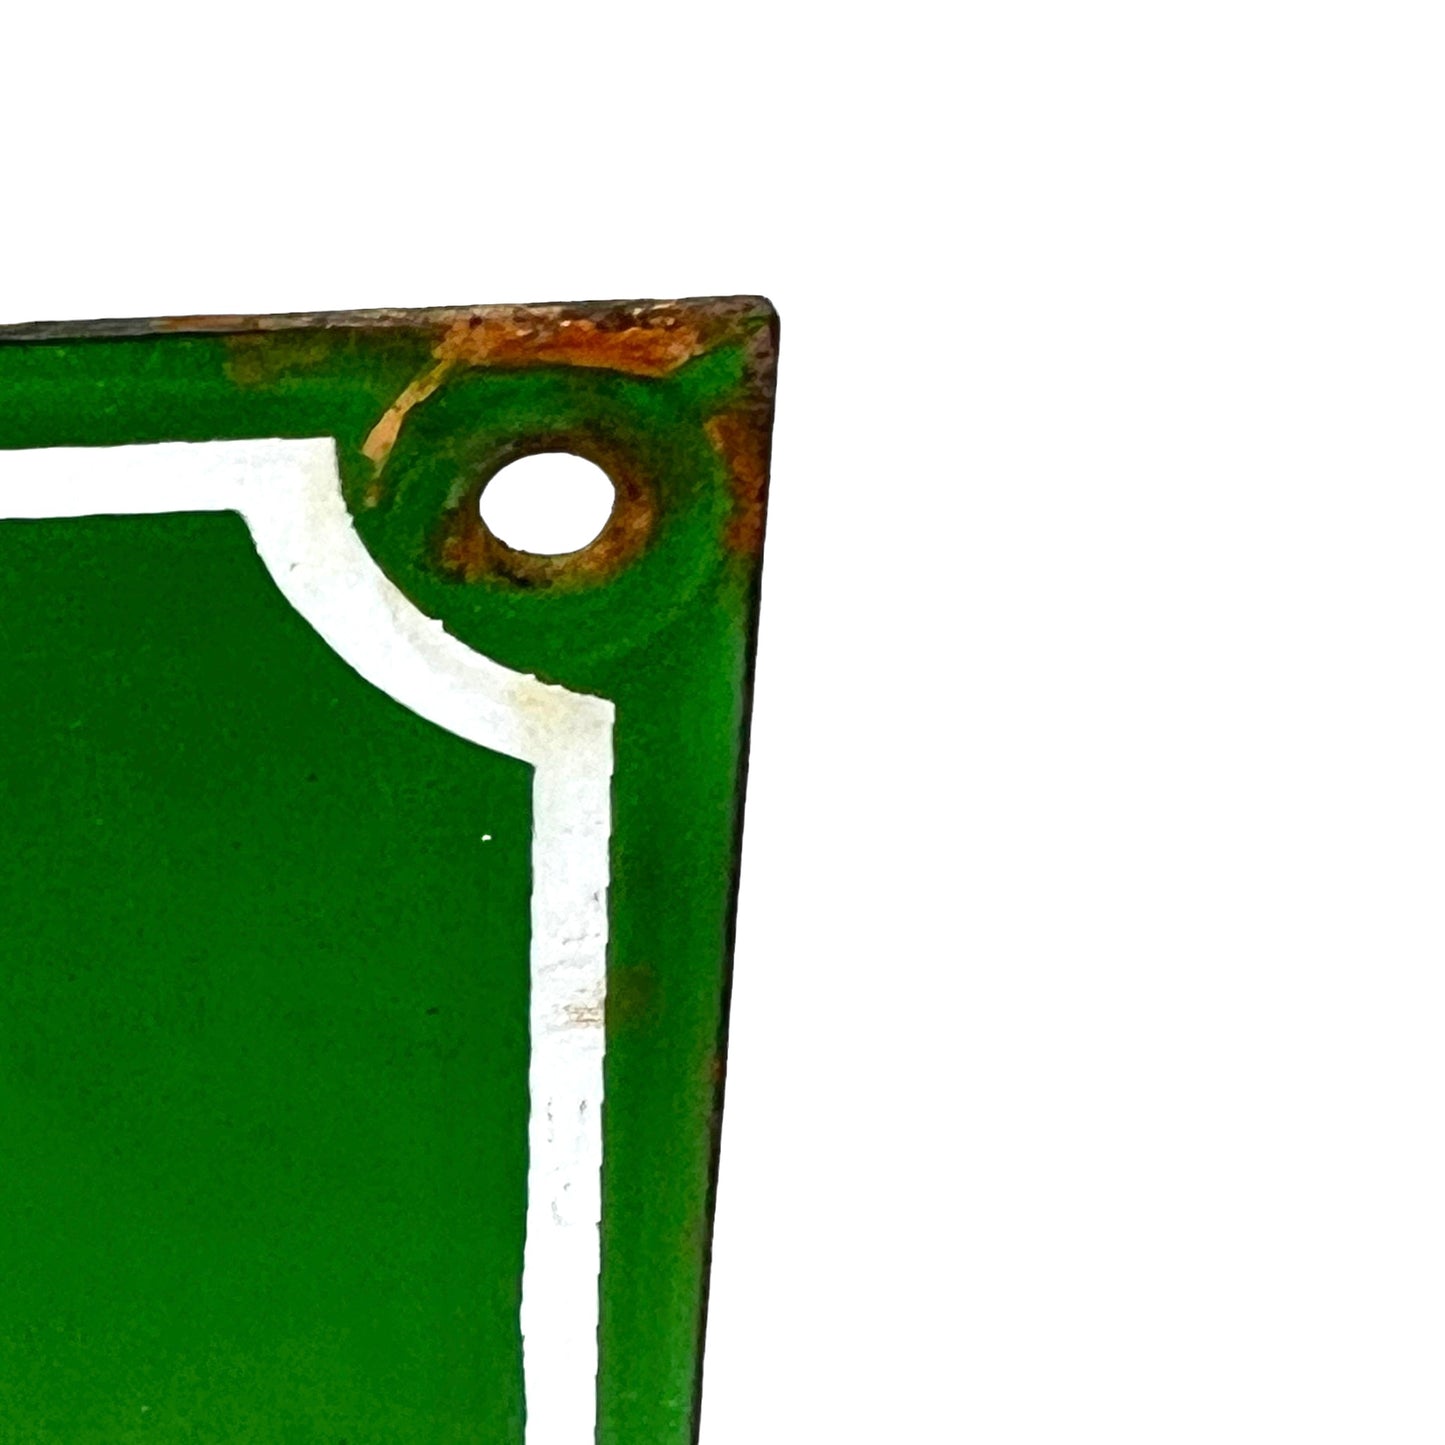 image 4 French enamel green and white door number 64 